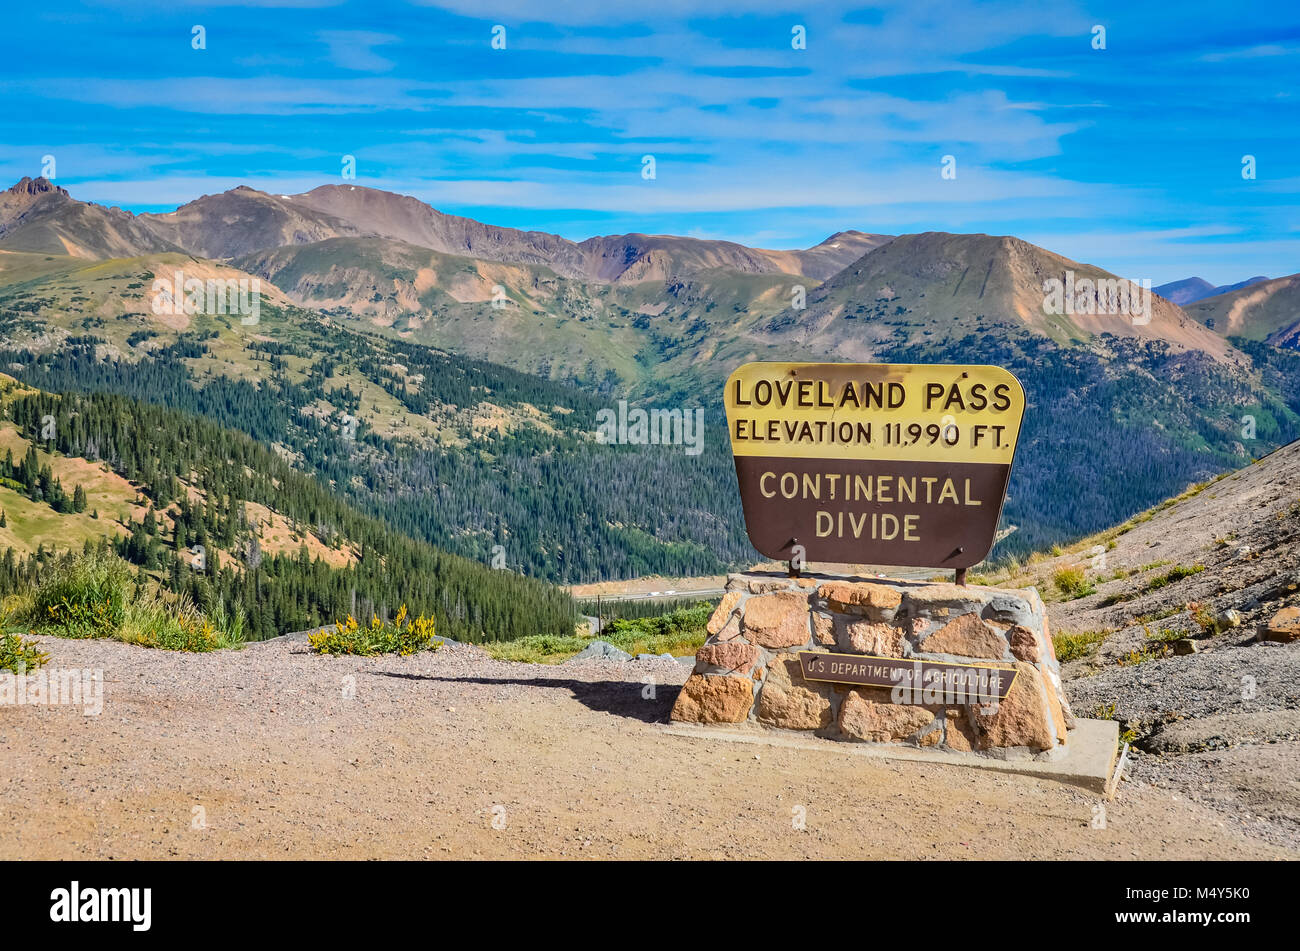 Loveland Pass is a high mountain pass in the western USA, at an elevation of 11,990 feet above sea level in the Rocky Mountains of Colorado. Stock Photo